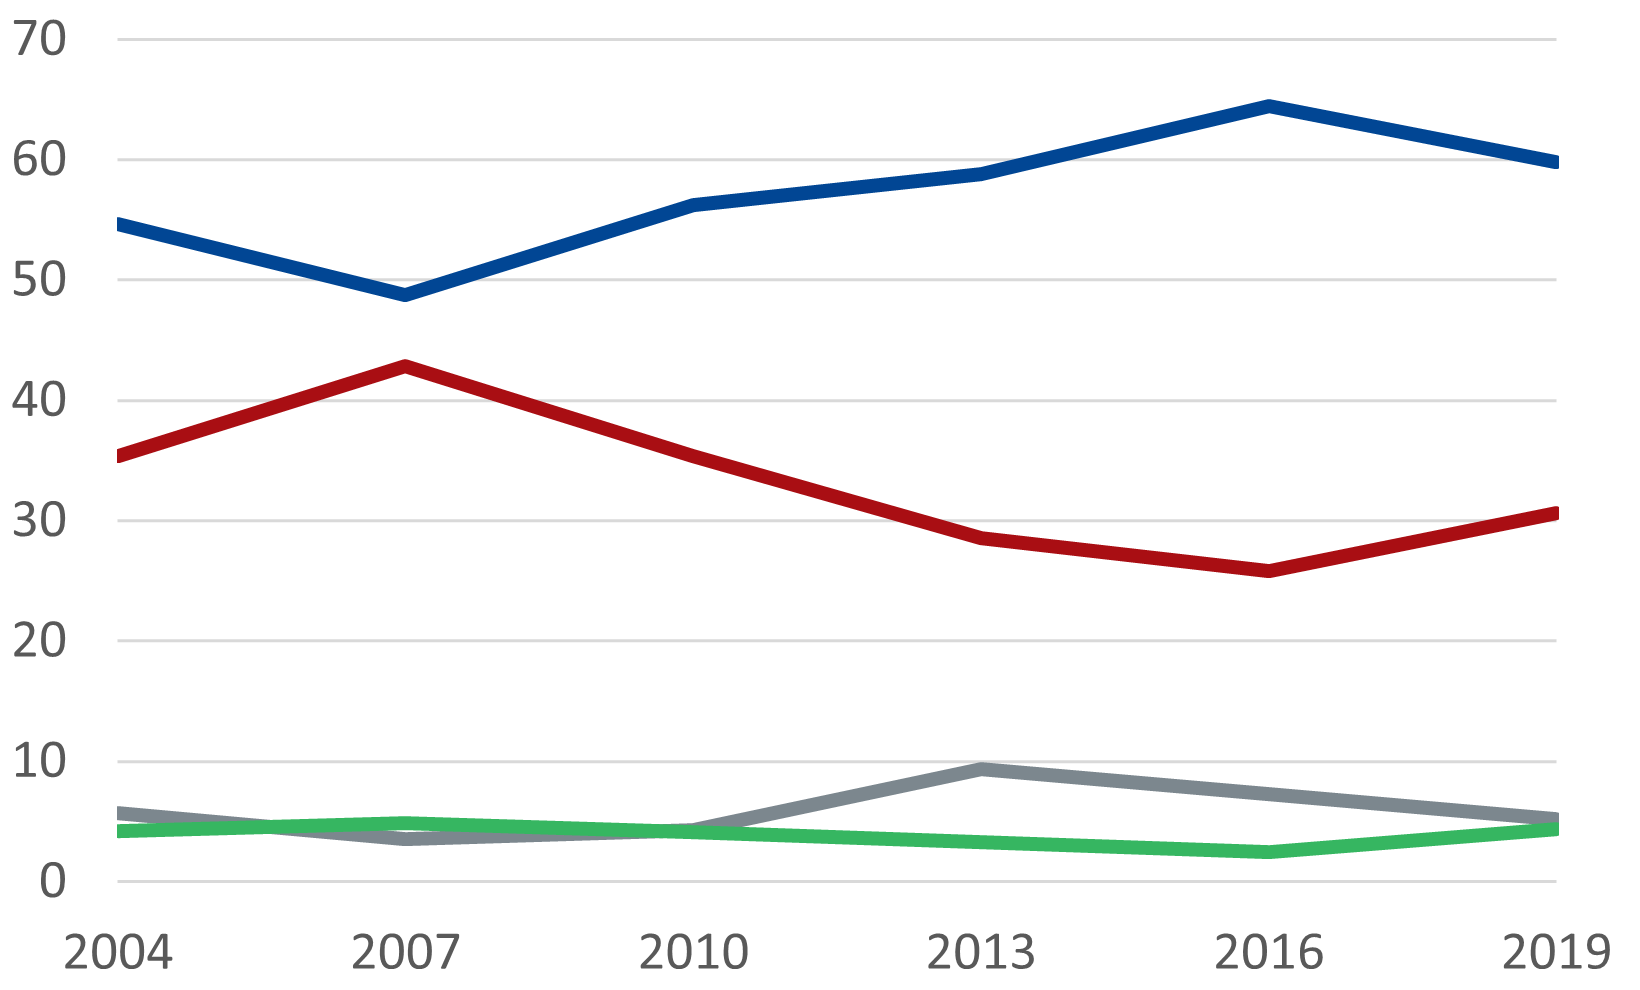 Graph of Silent Generation’s first preference percentage by party, elections 2004 to 2019